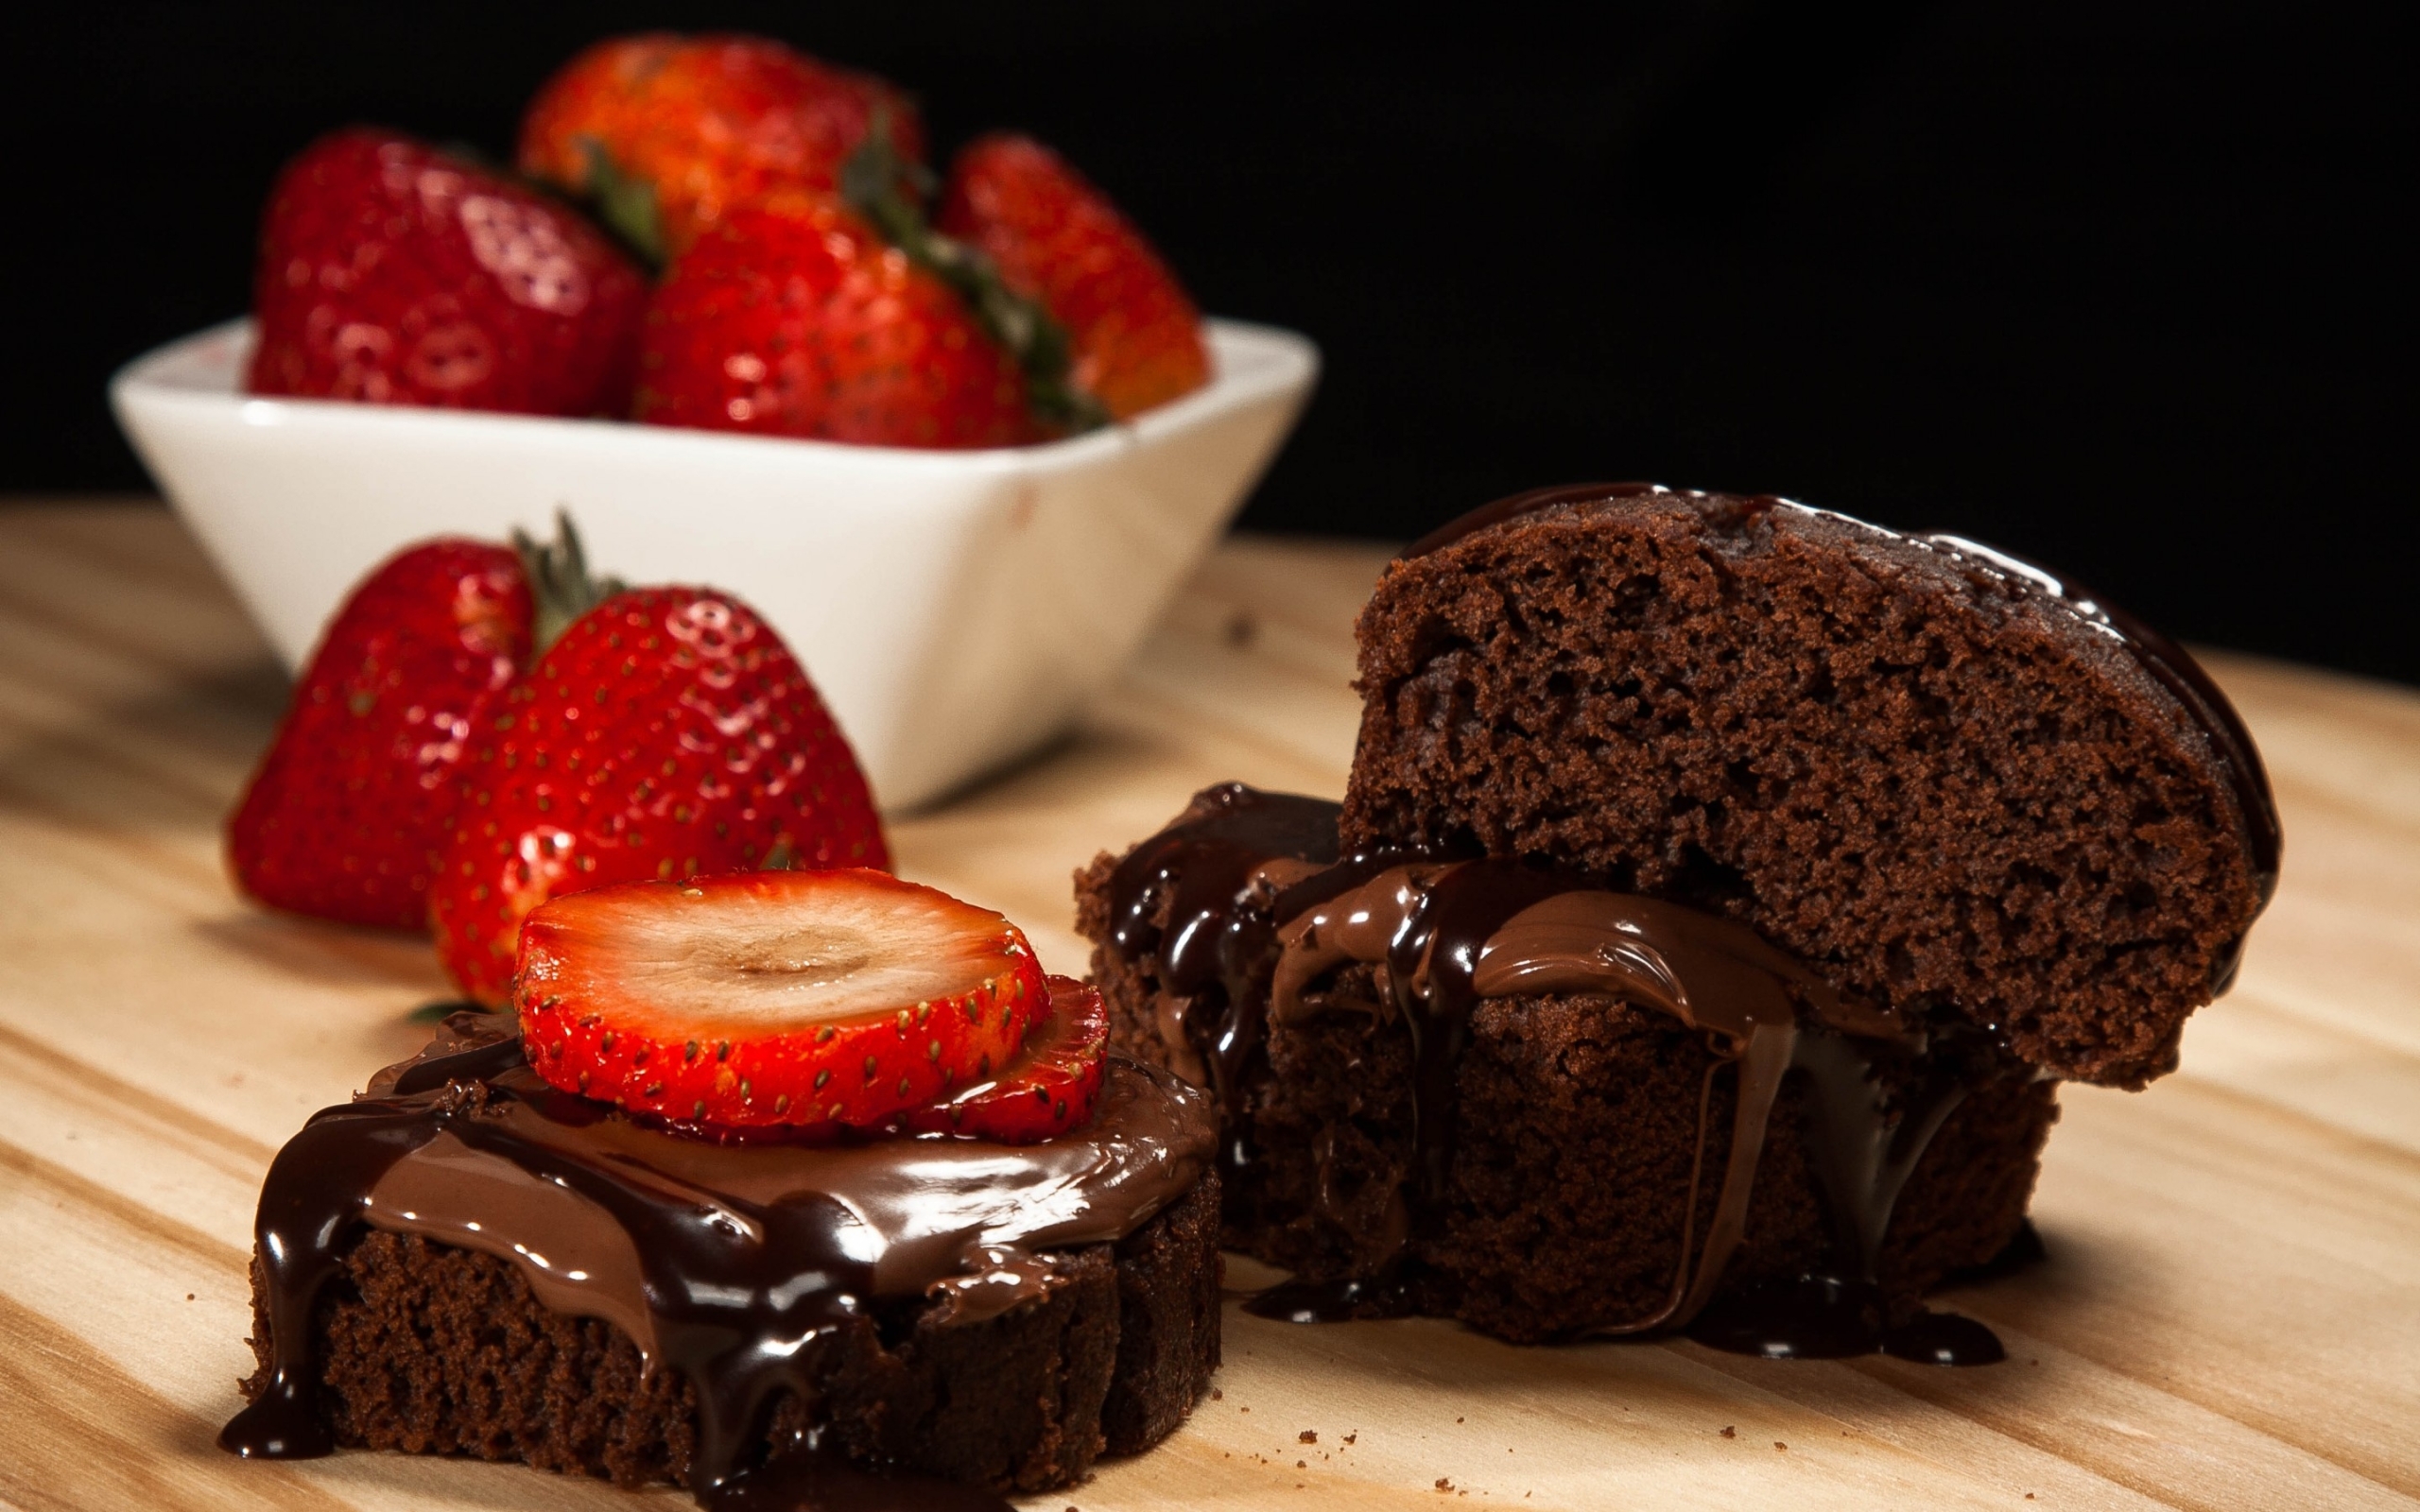 Dark Chocolate Cakes And Strawberries Widescreen Wallpaper Wide